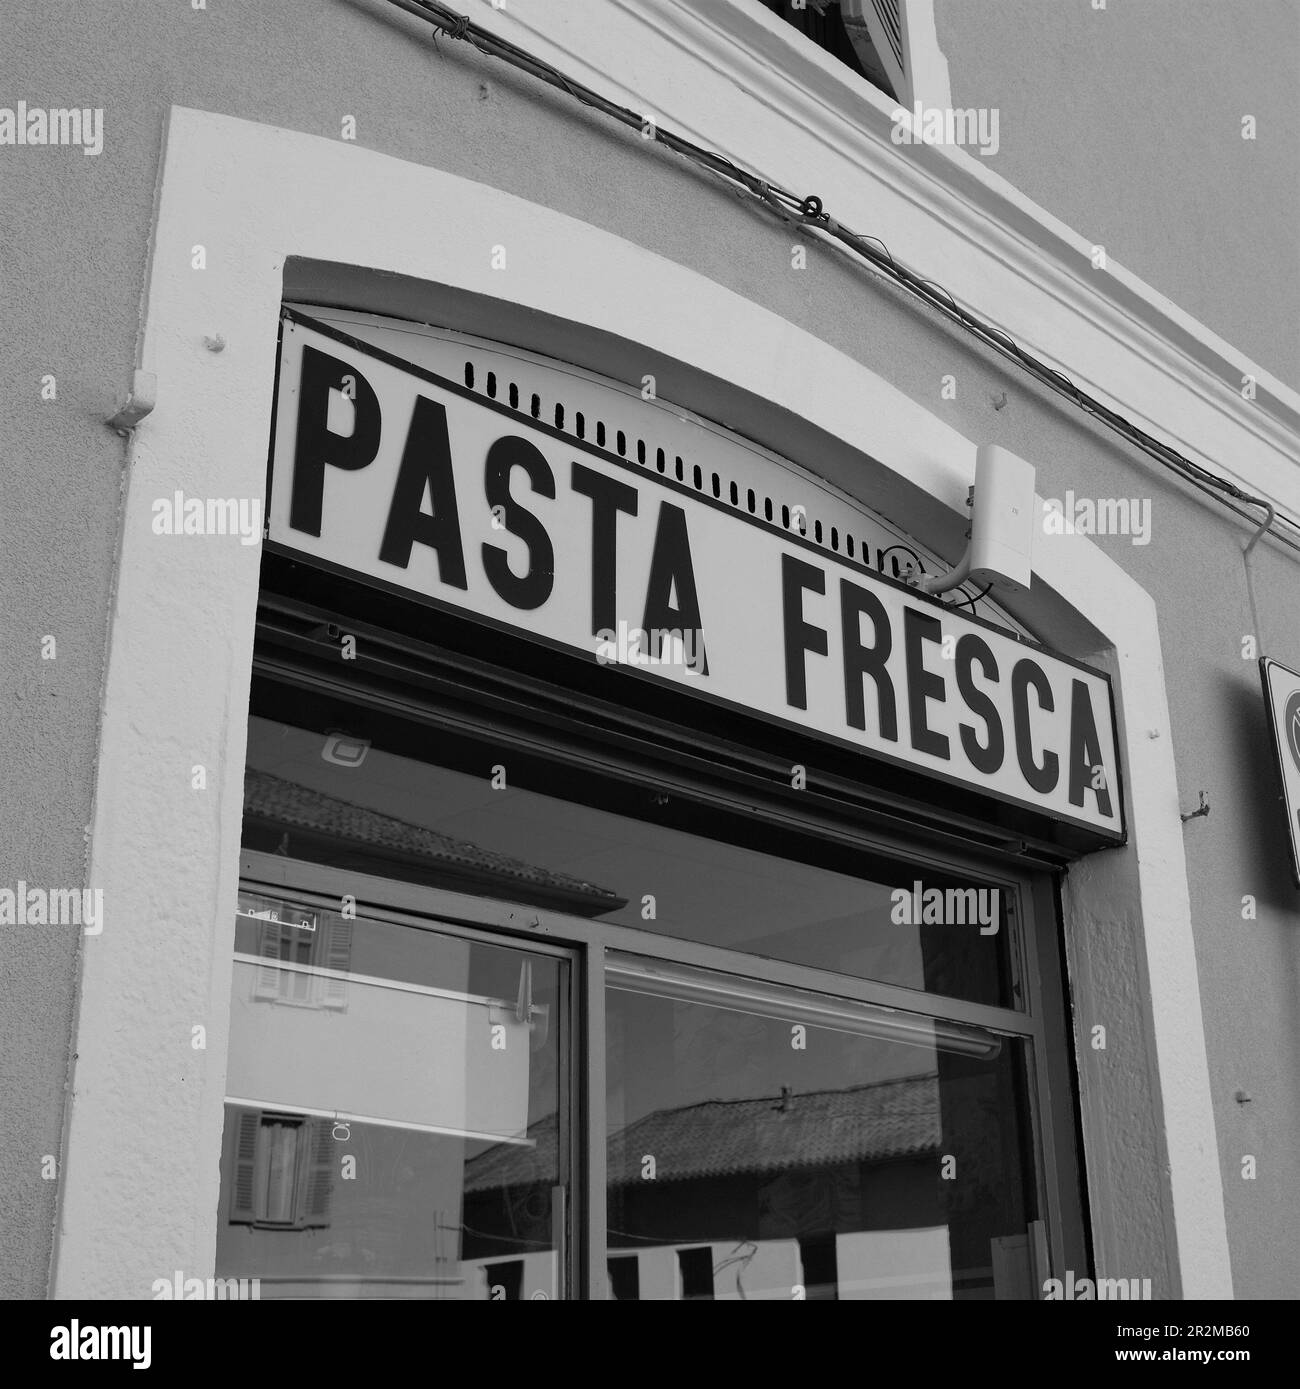 Fresh pasta sign outside a store in Italy. Stock Photo